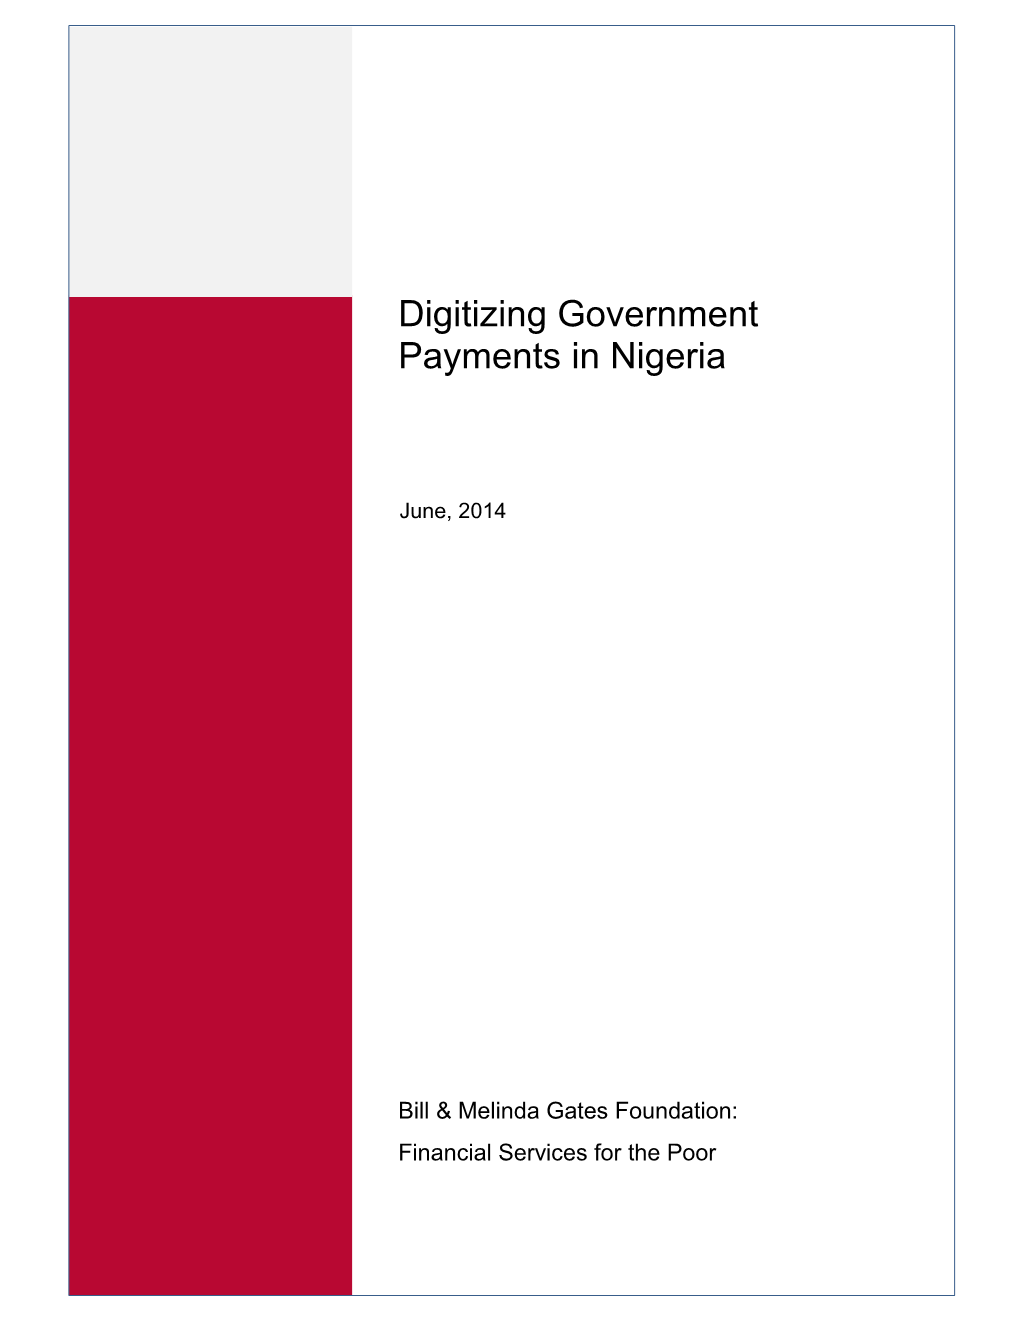 Digitizing Government Payments in Nigeria